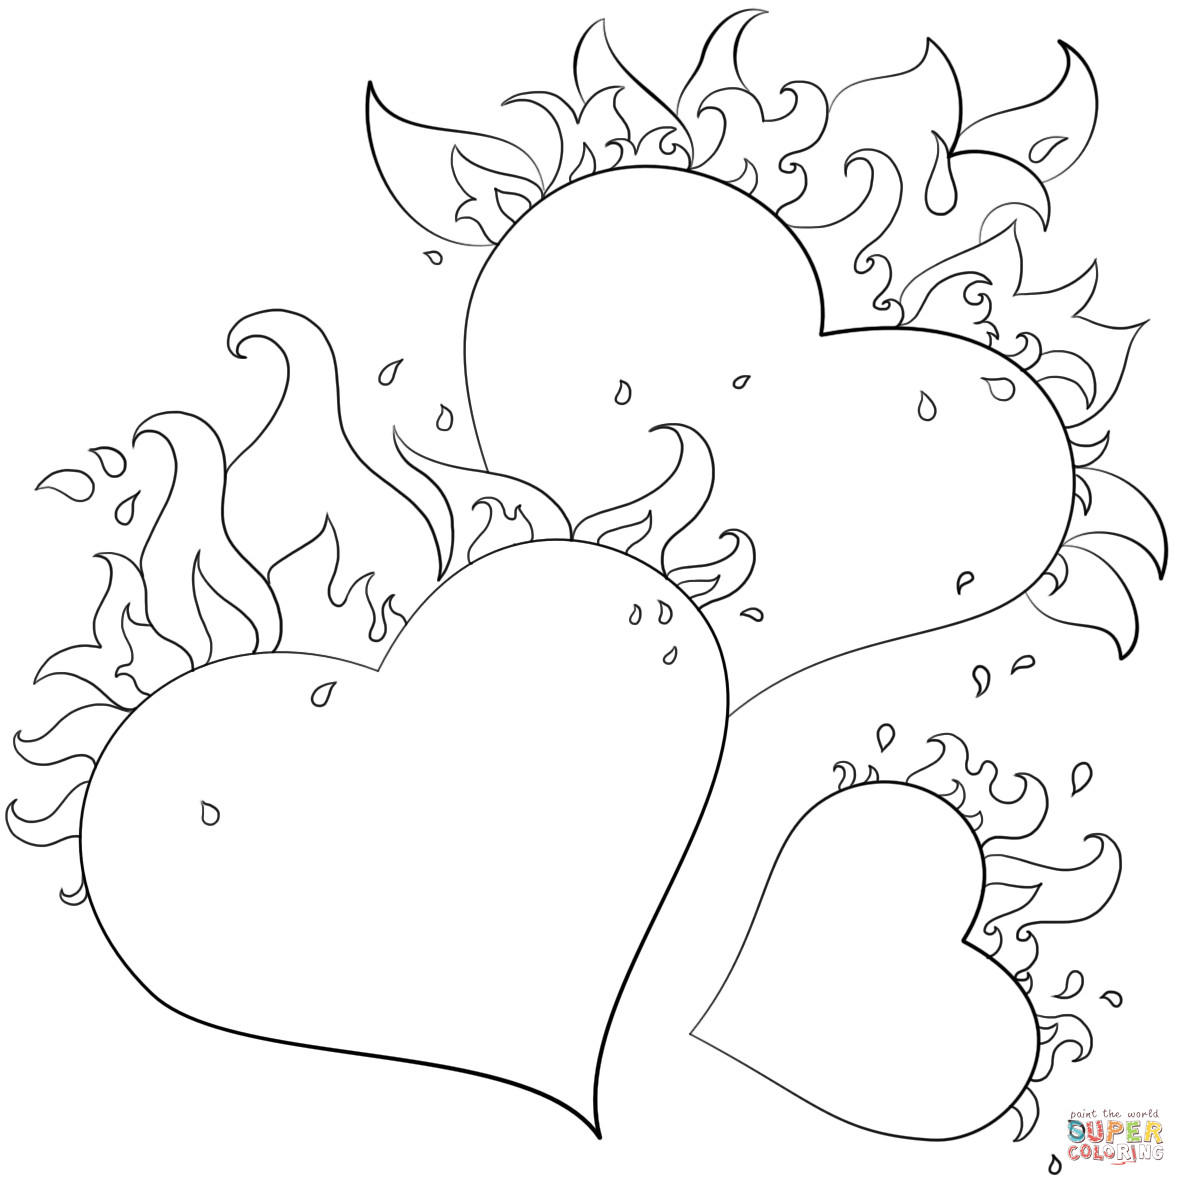 Roses And Hearts Coloring Pages Coloring Pages For Adults Roses And Hearts Printable Coloring